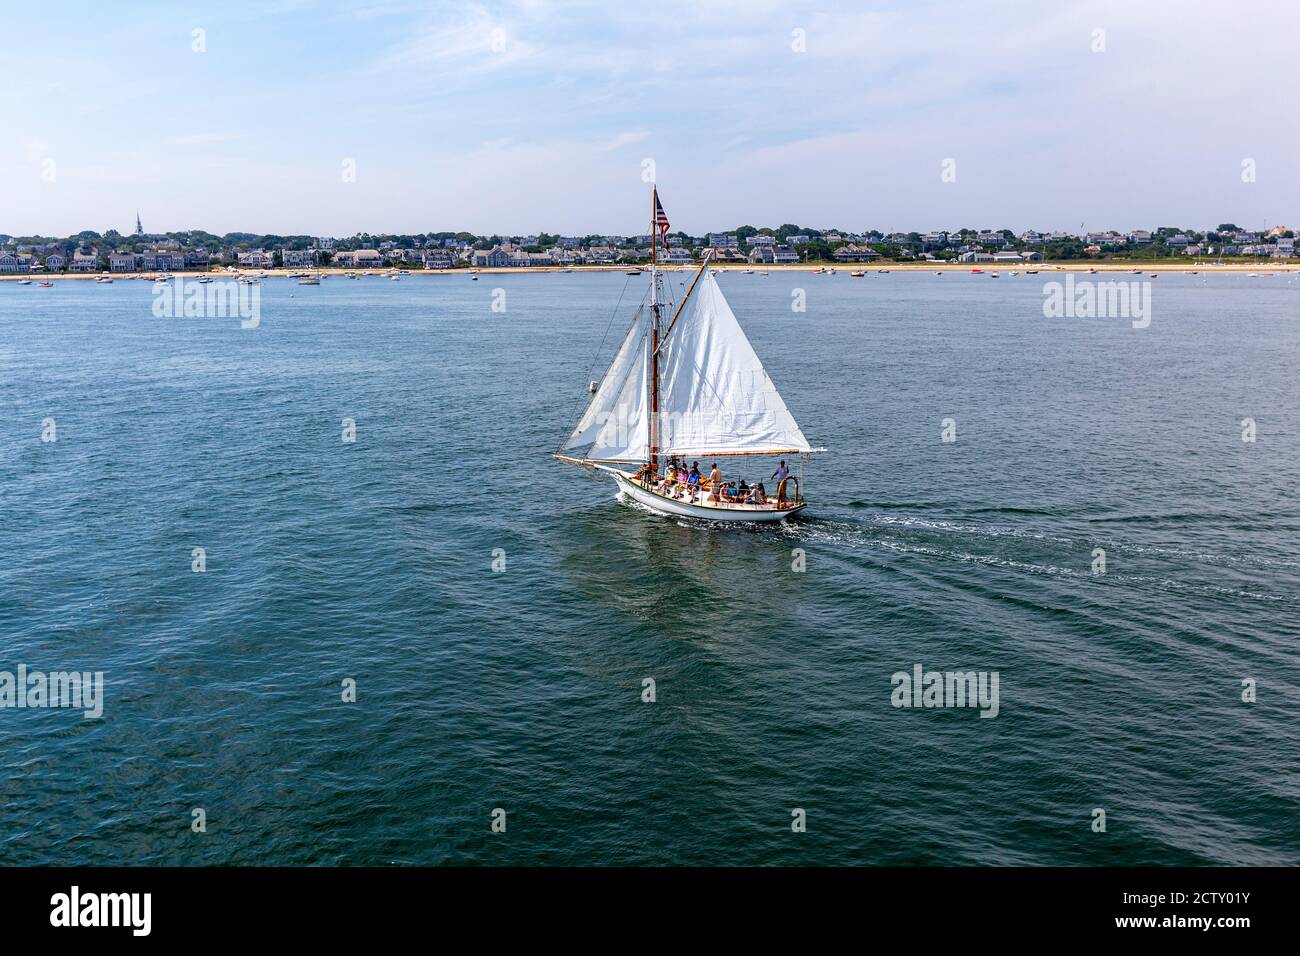 Sailing boat from ferry to Nantucket, Hyannis, Barnstable, Cape Cod peninsula, Massachusetts, USA Stock Photo